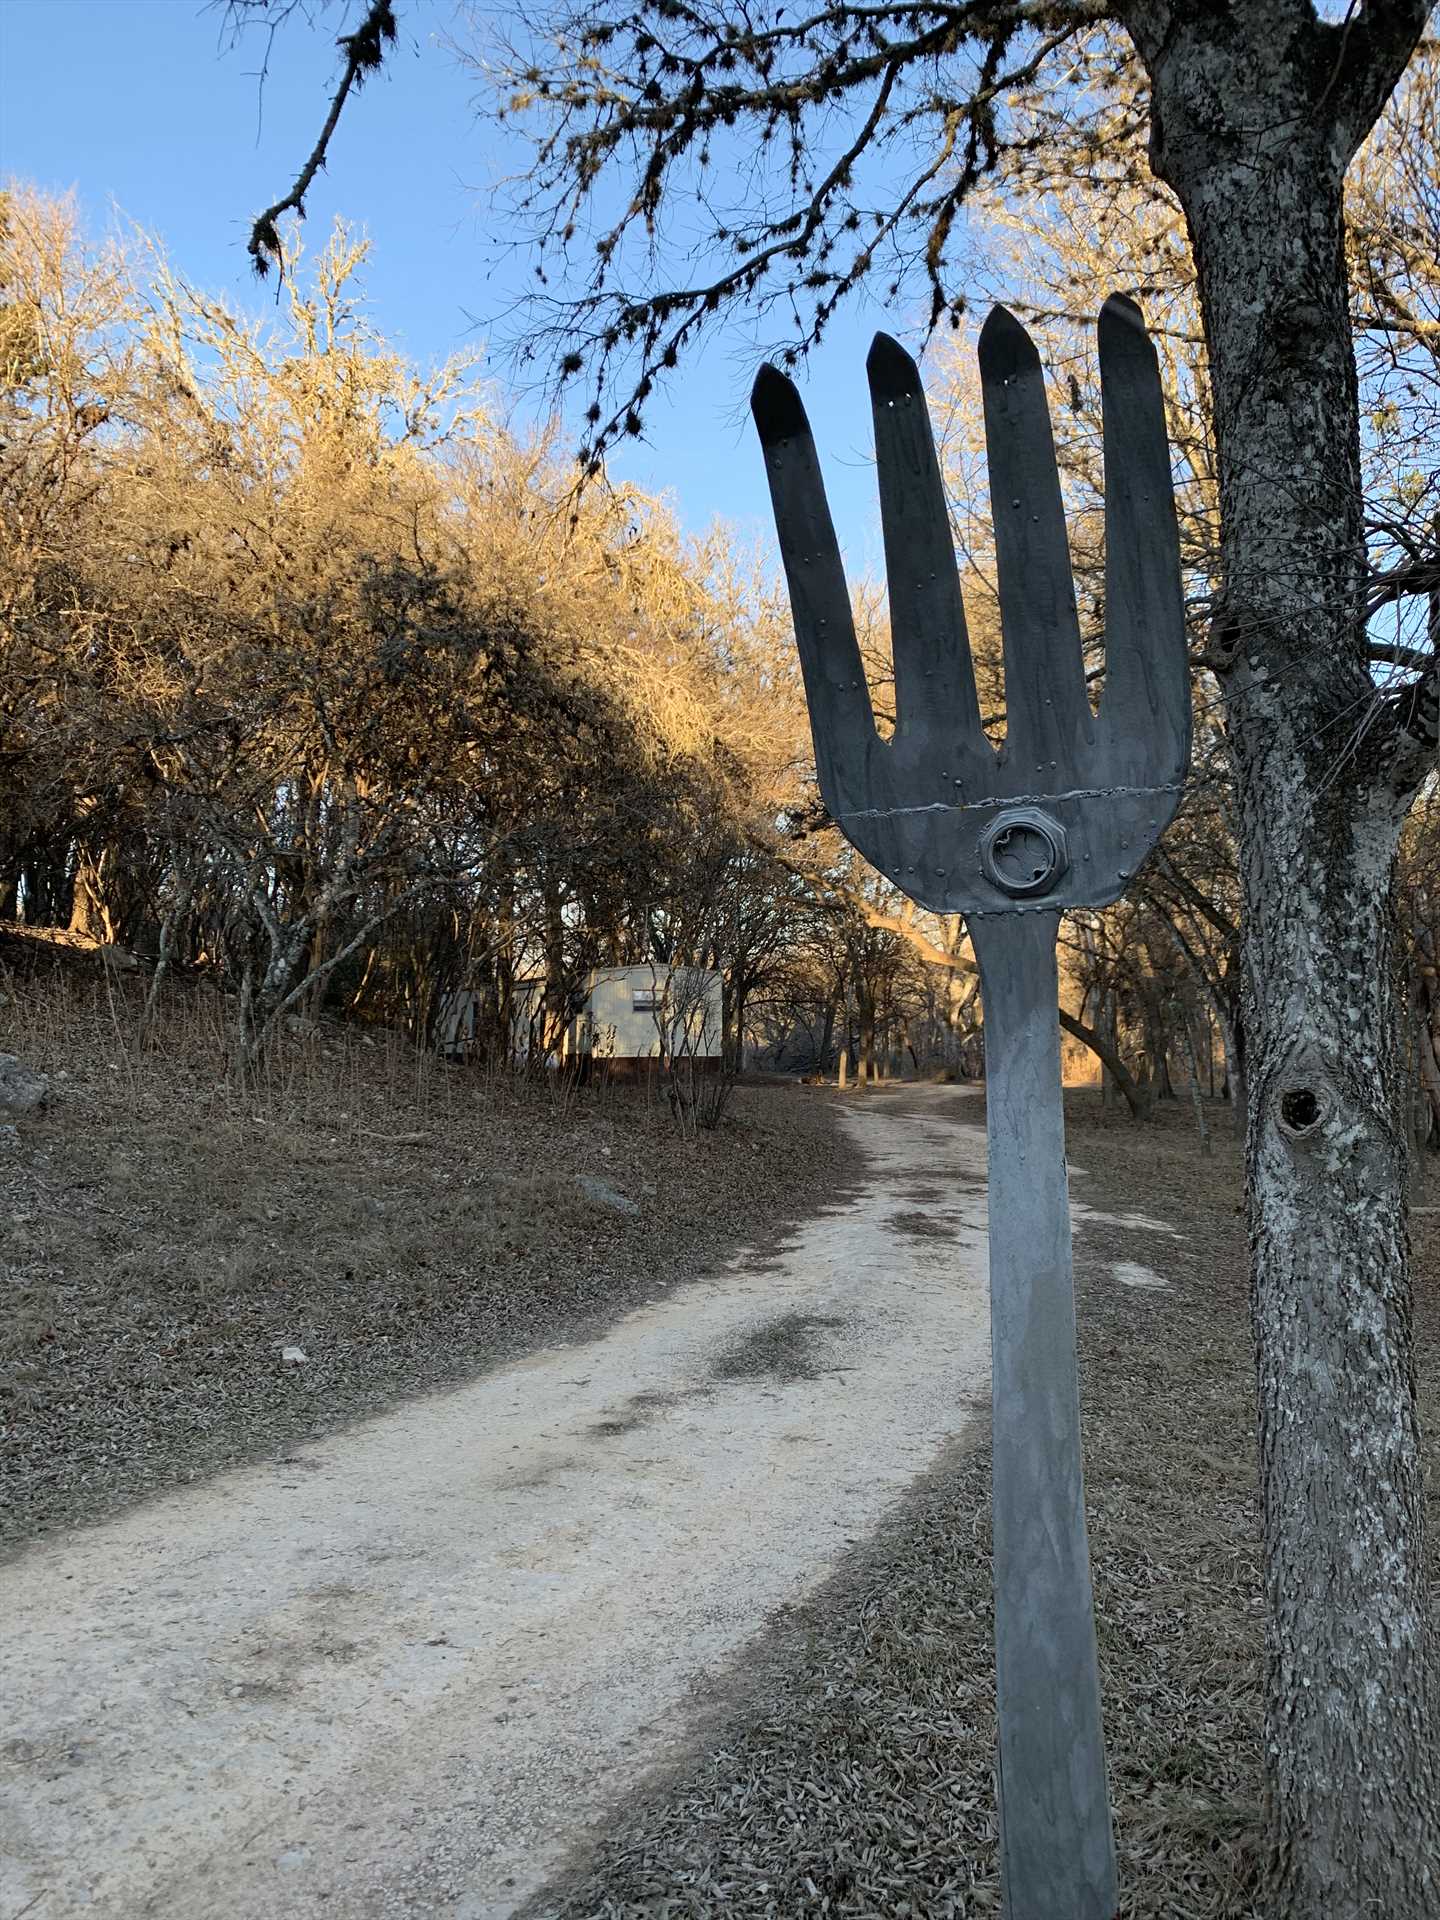                                                 Miles of country roads (with and without forks) surround the ranch for scenic Hill Country tours!